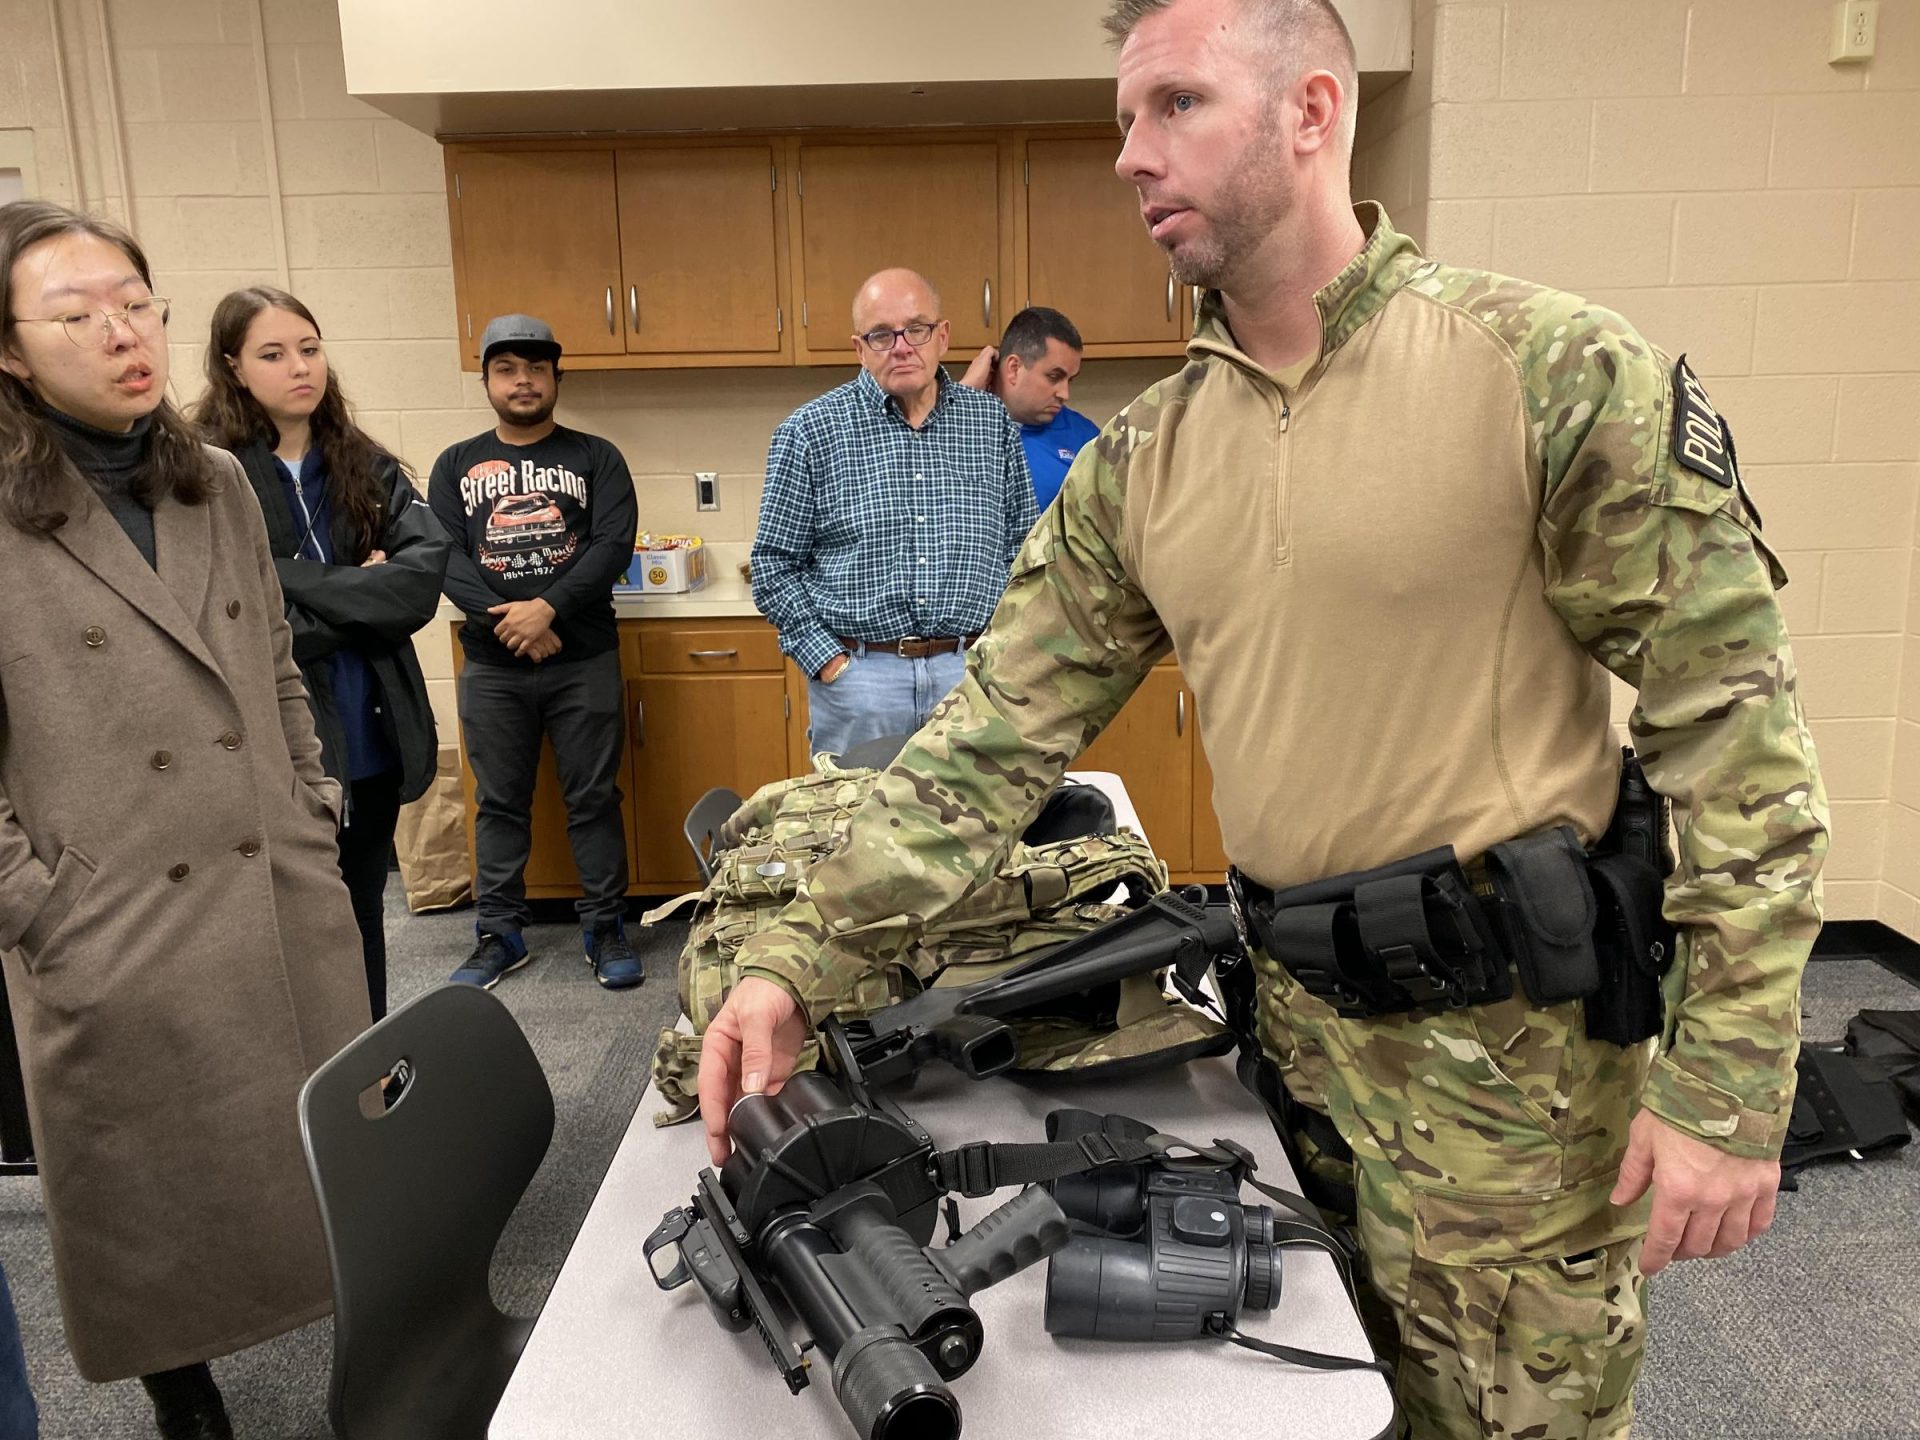 Officer Adam Salyards shows participants examples of tactical gear during the Centre County Citizens’ Police Academy.